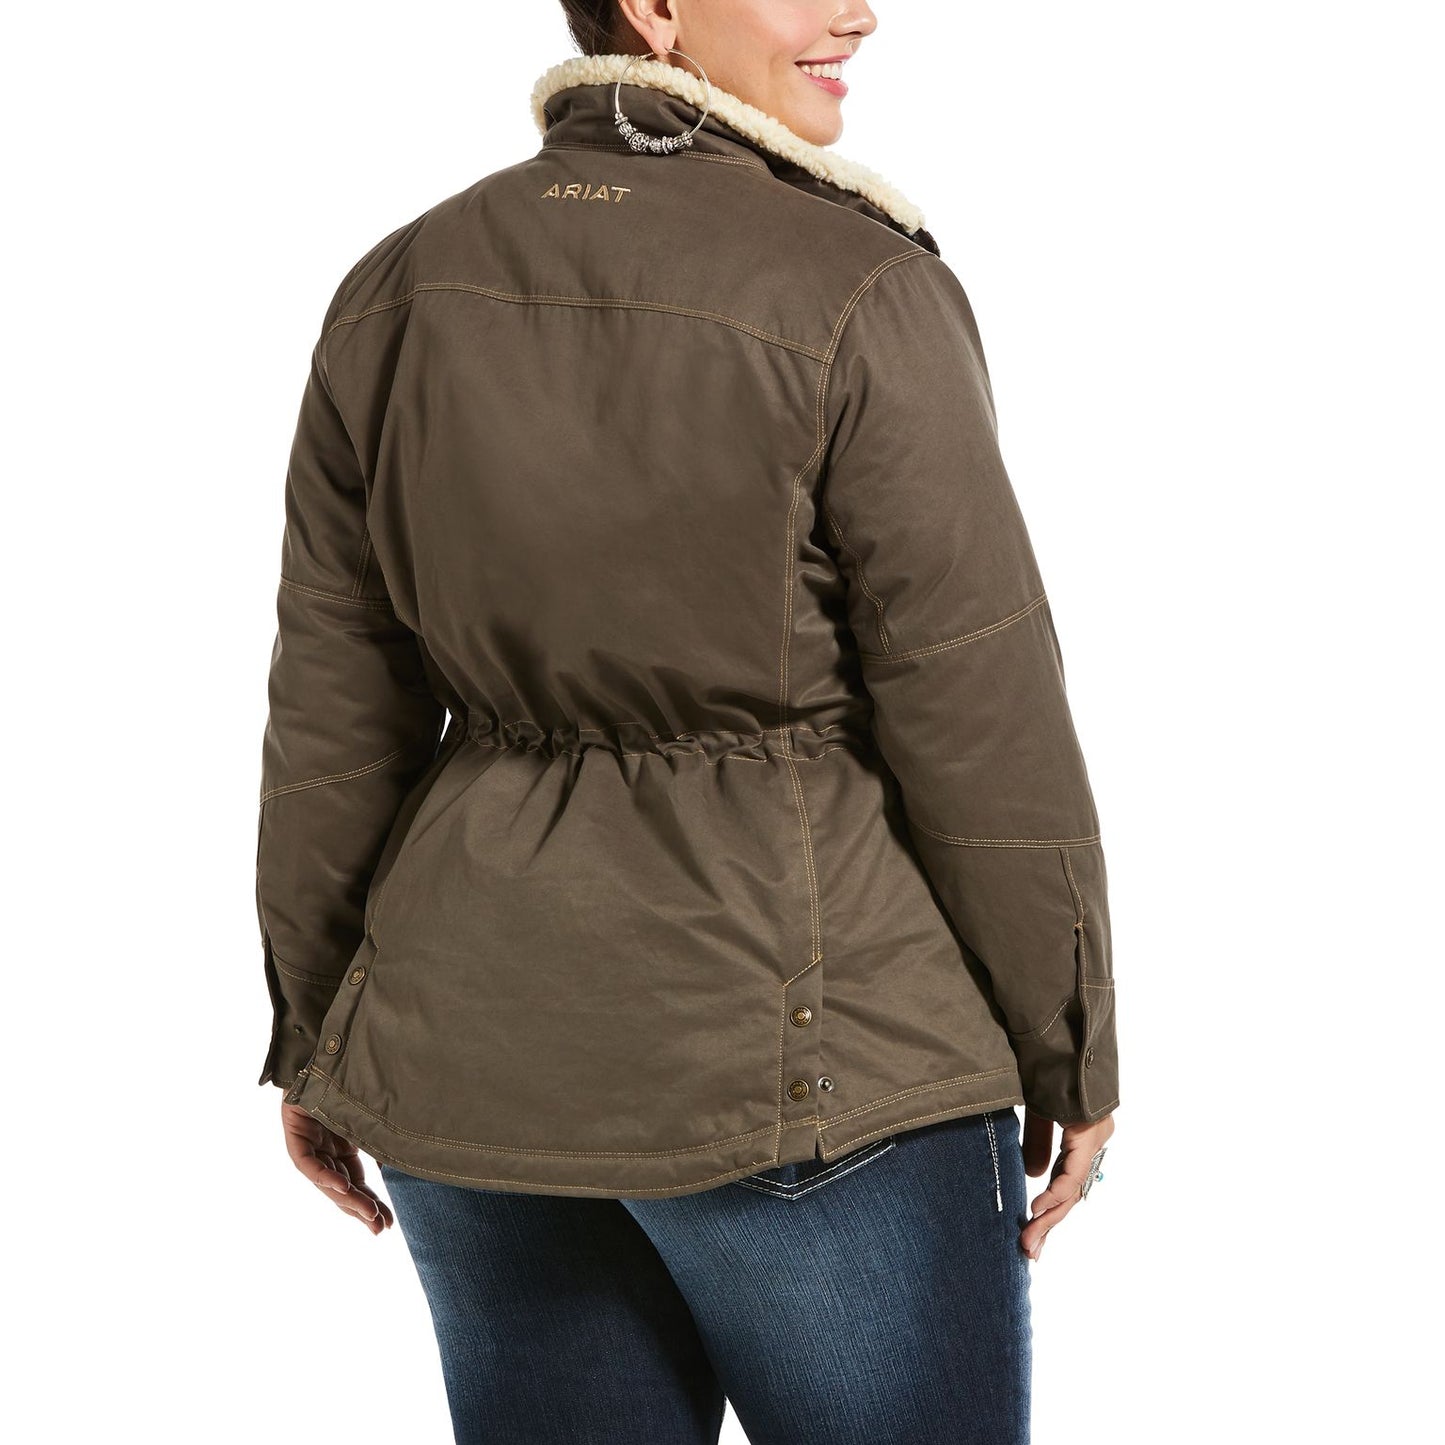 Ariat Women’s REAL Grizzly Utility Jacket Banyan Bark